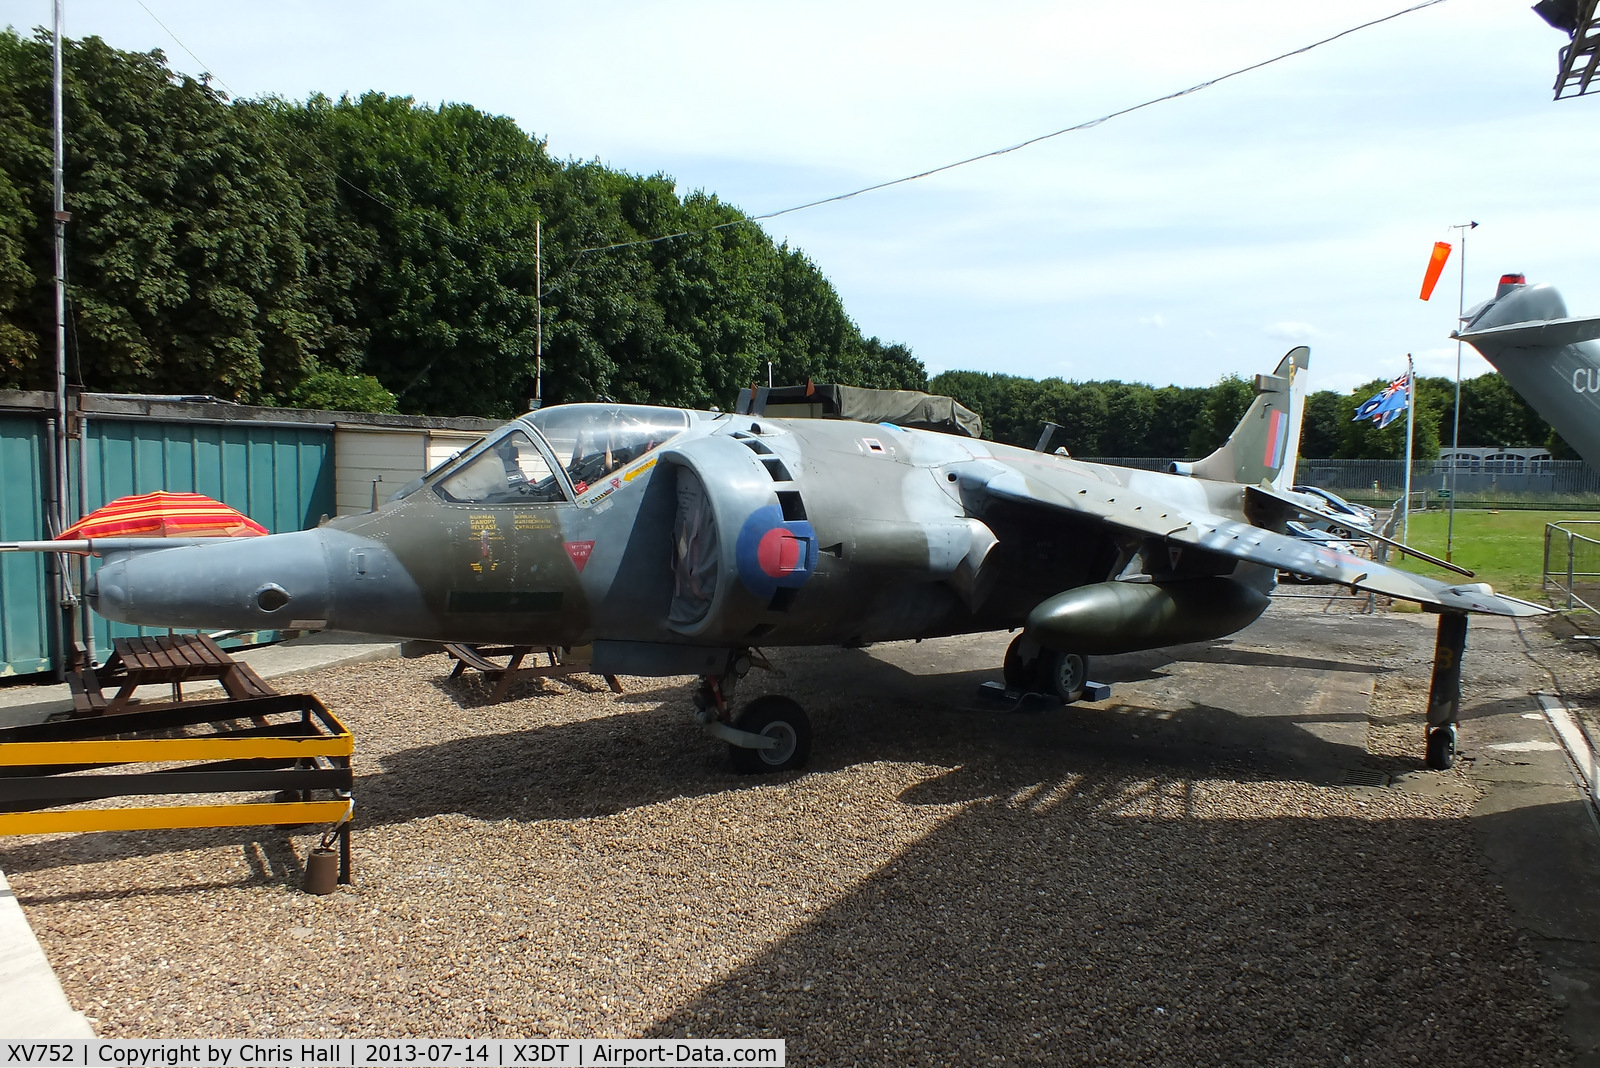 XV752, 1969 Hawker Siddeley Harrier GR.3 C/N 712015, preserved at the South Yorkshire Aircraft Museum, AeroVenture, Doncaster